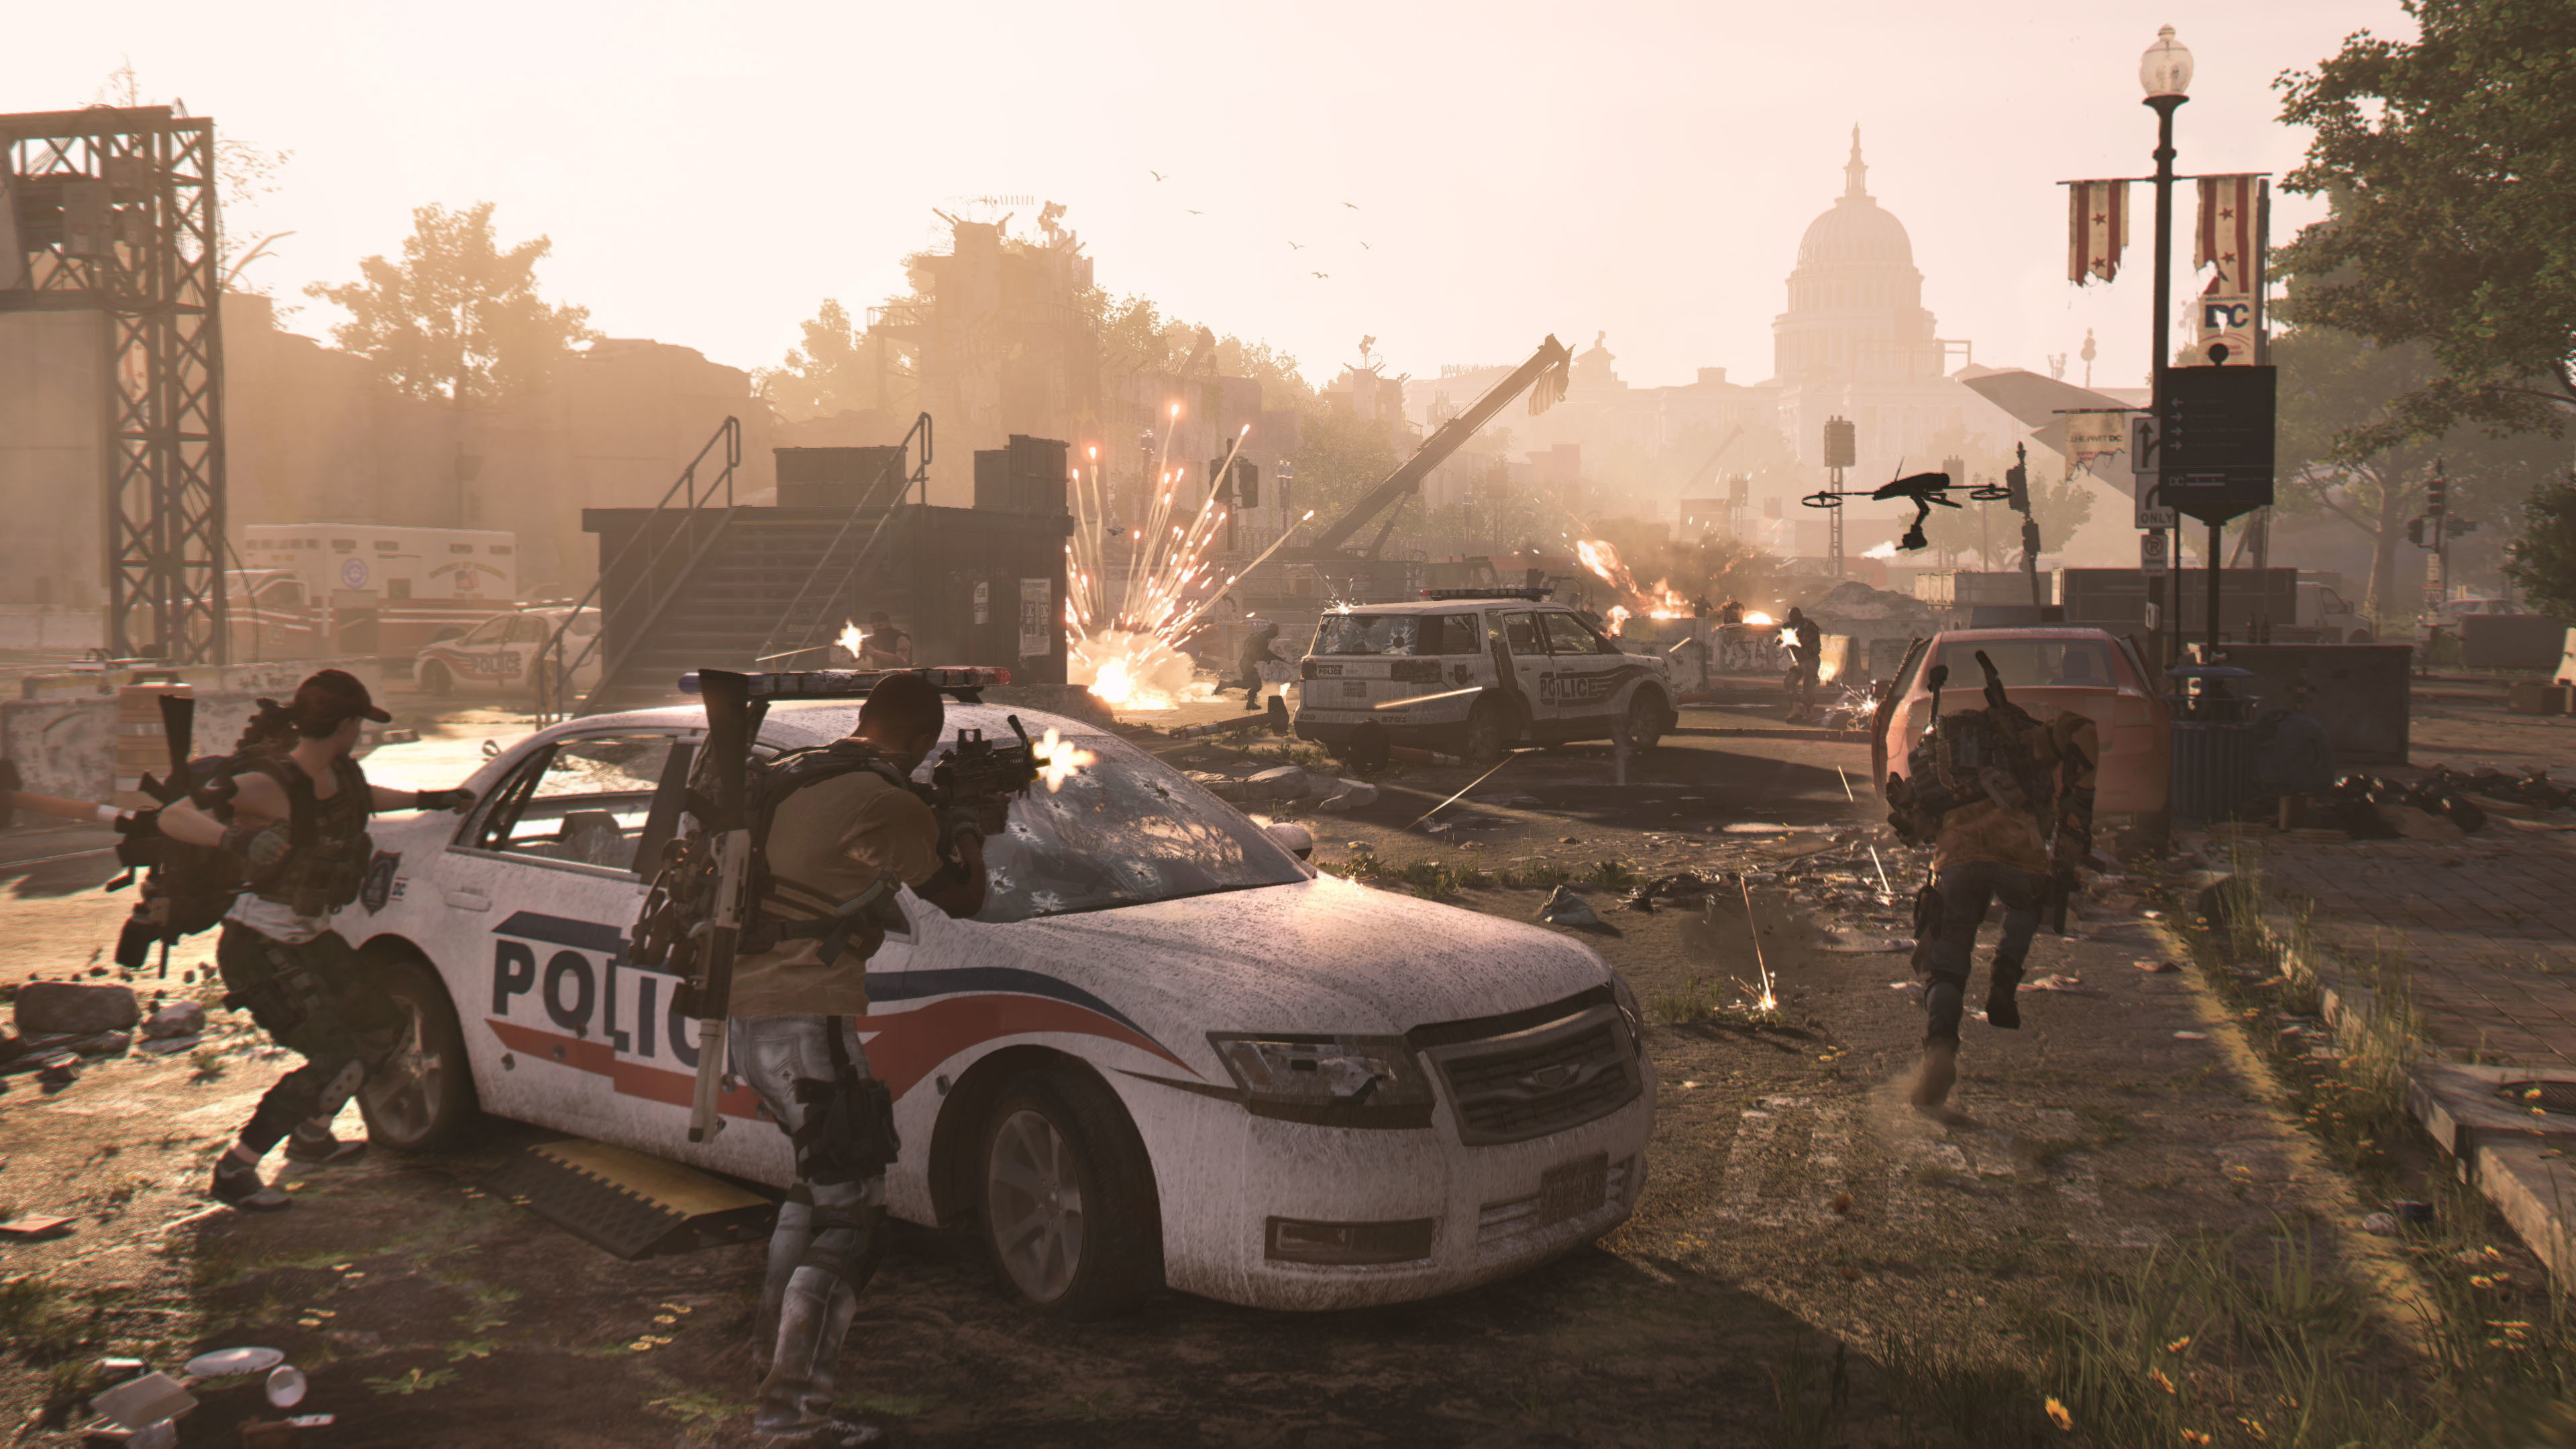 Tom Clancy's The Division 2 Wallpapers